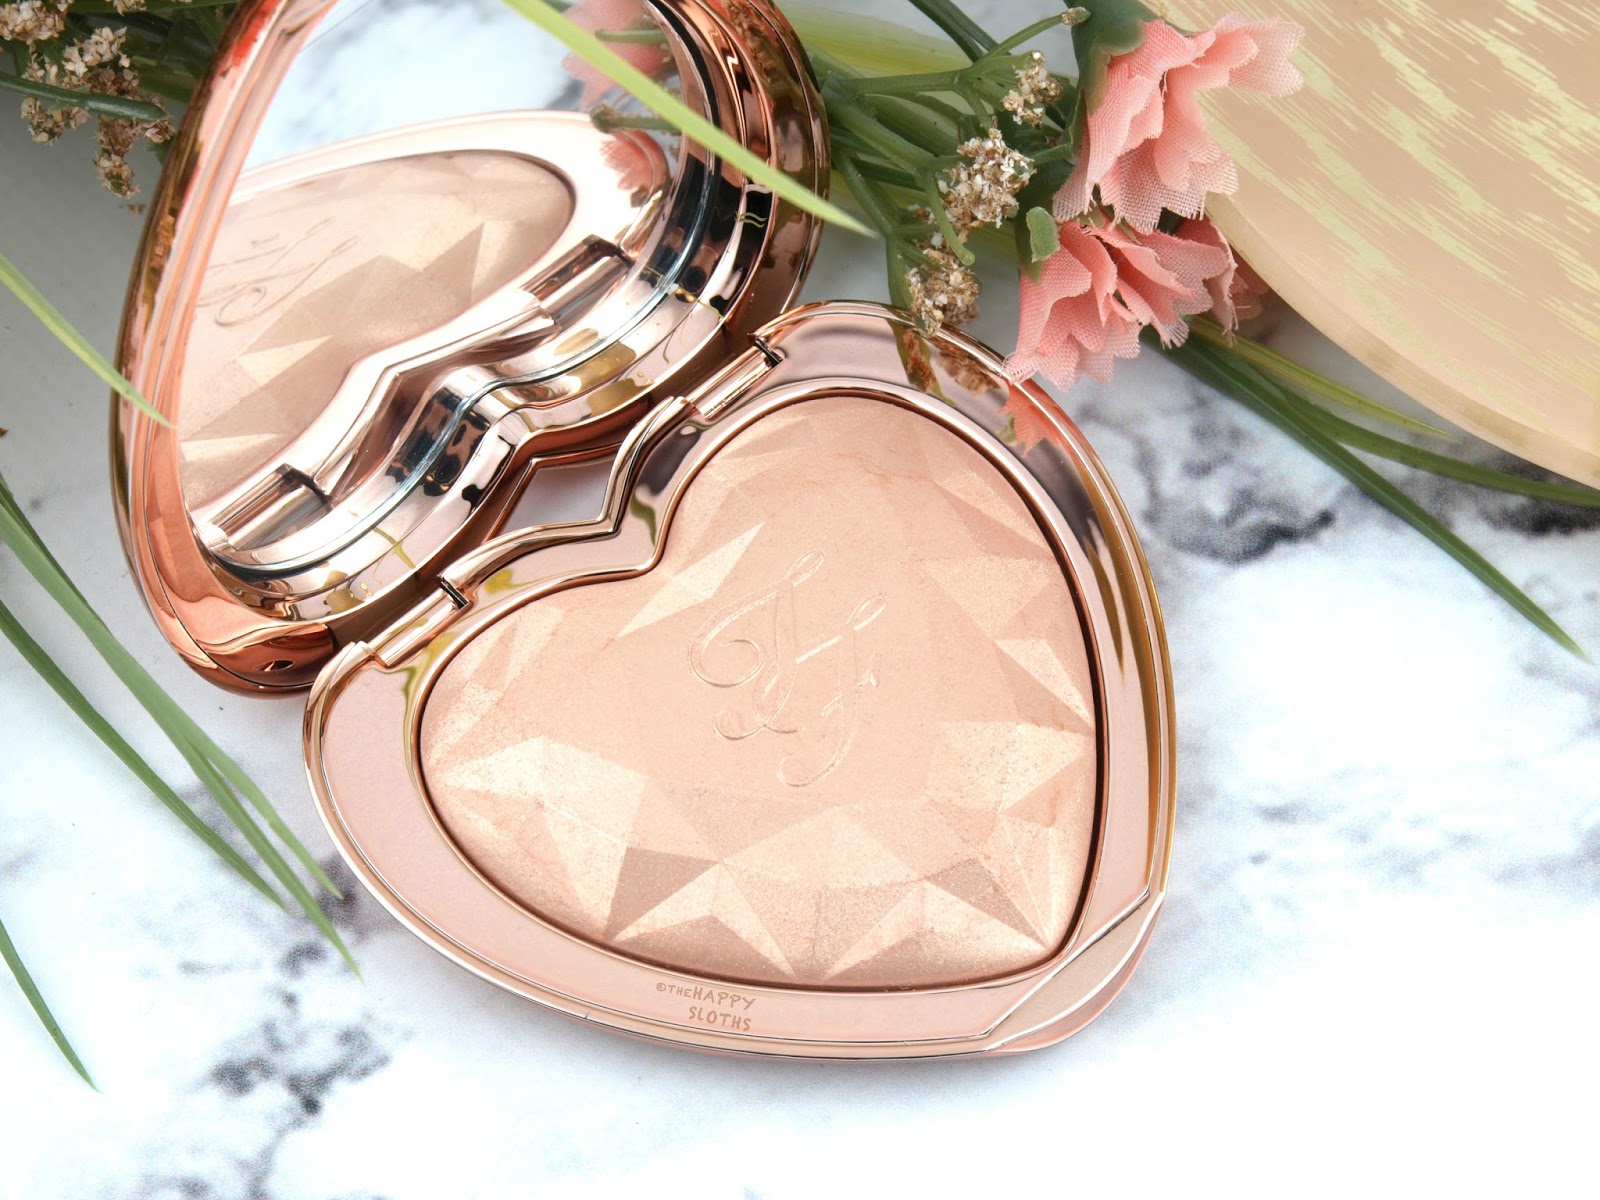 Too Faced Love Light Prismatic Highlighter in "Ray of Light": Review and Swatches